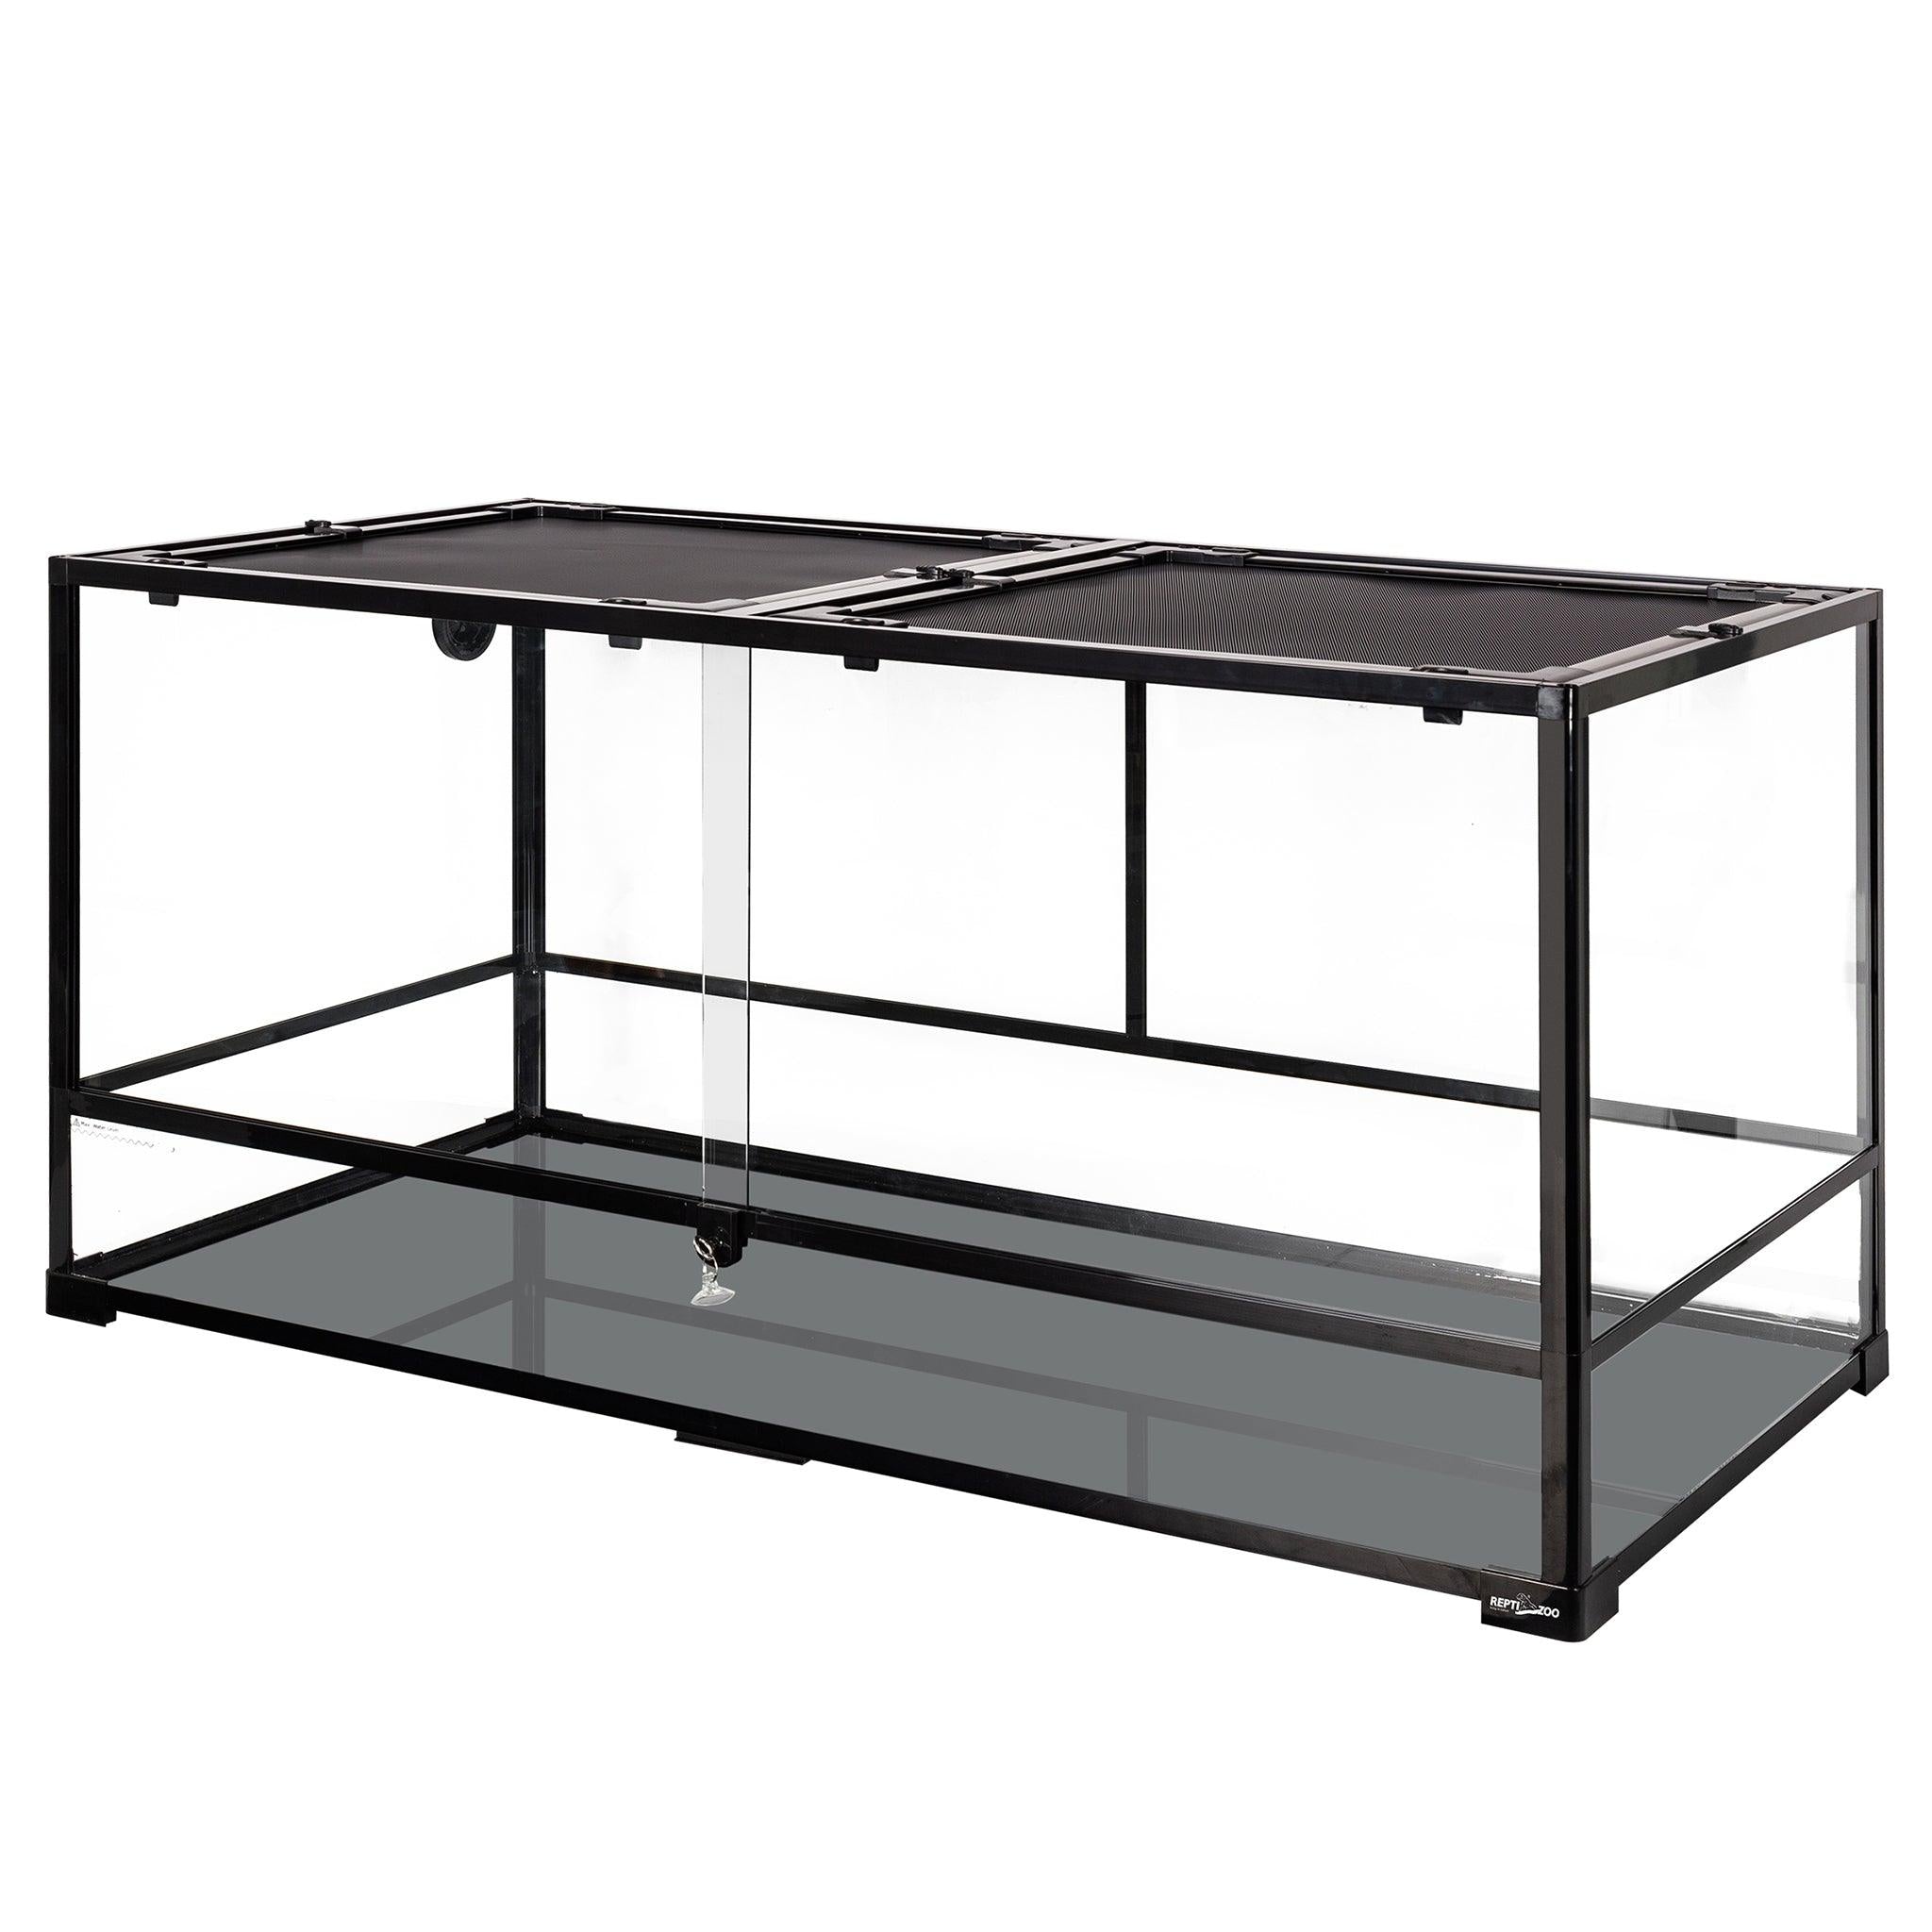 REPTI ZOO 120 Gallons Reptile Tank with Waterproof Bottom Sliding Door Double Top Wire Mesh Covers